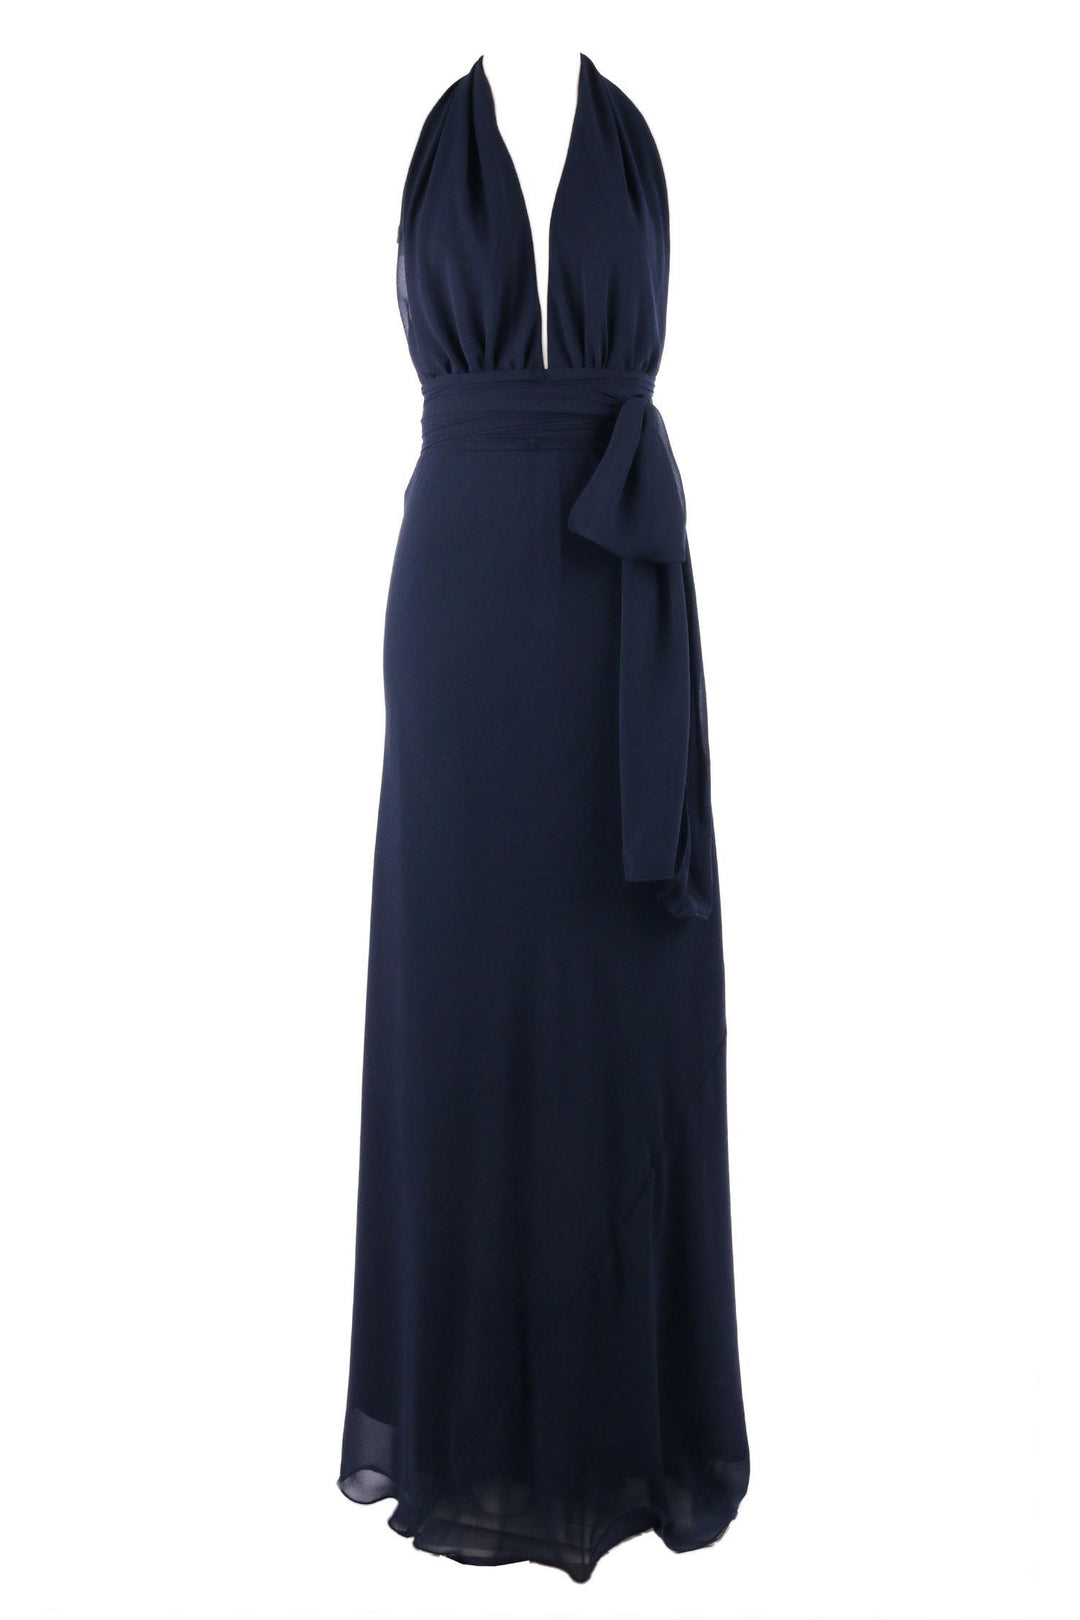 Cameo in Navy | Poly Georgette Dresses Lucy Laurita - Leiela 